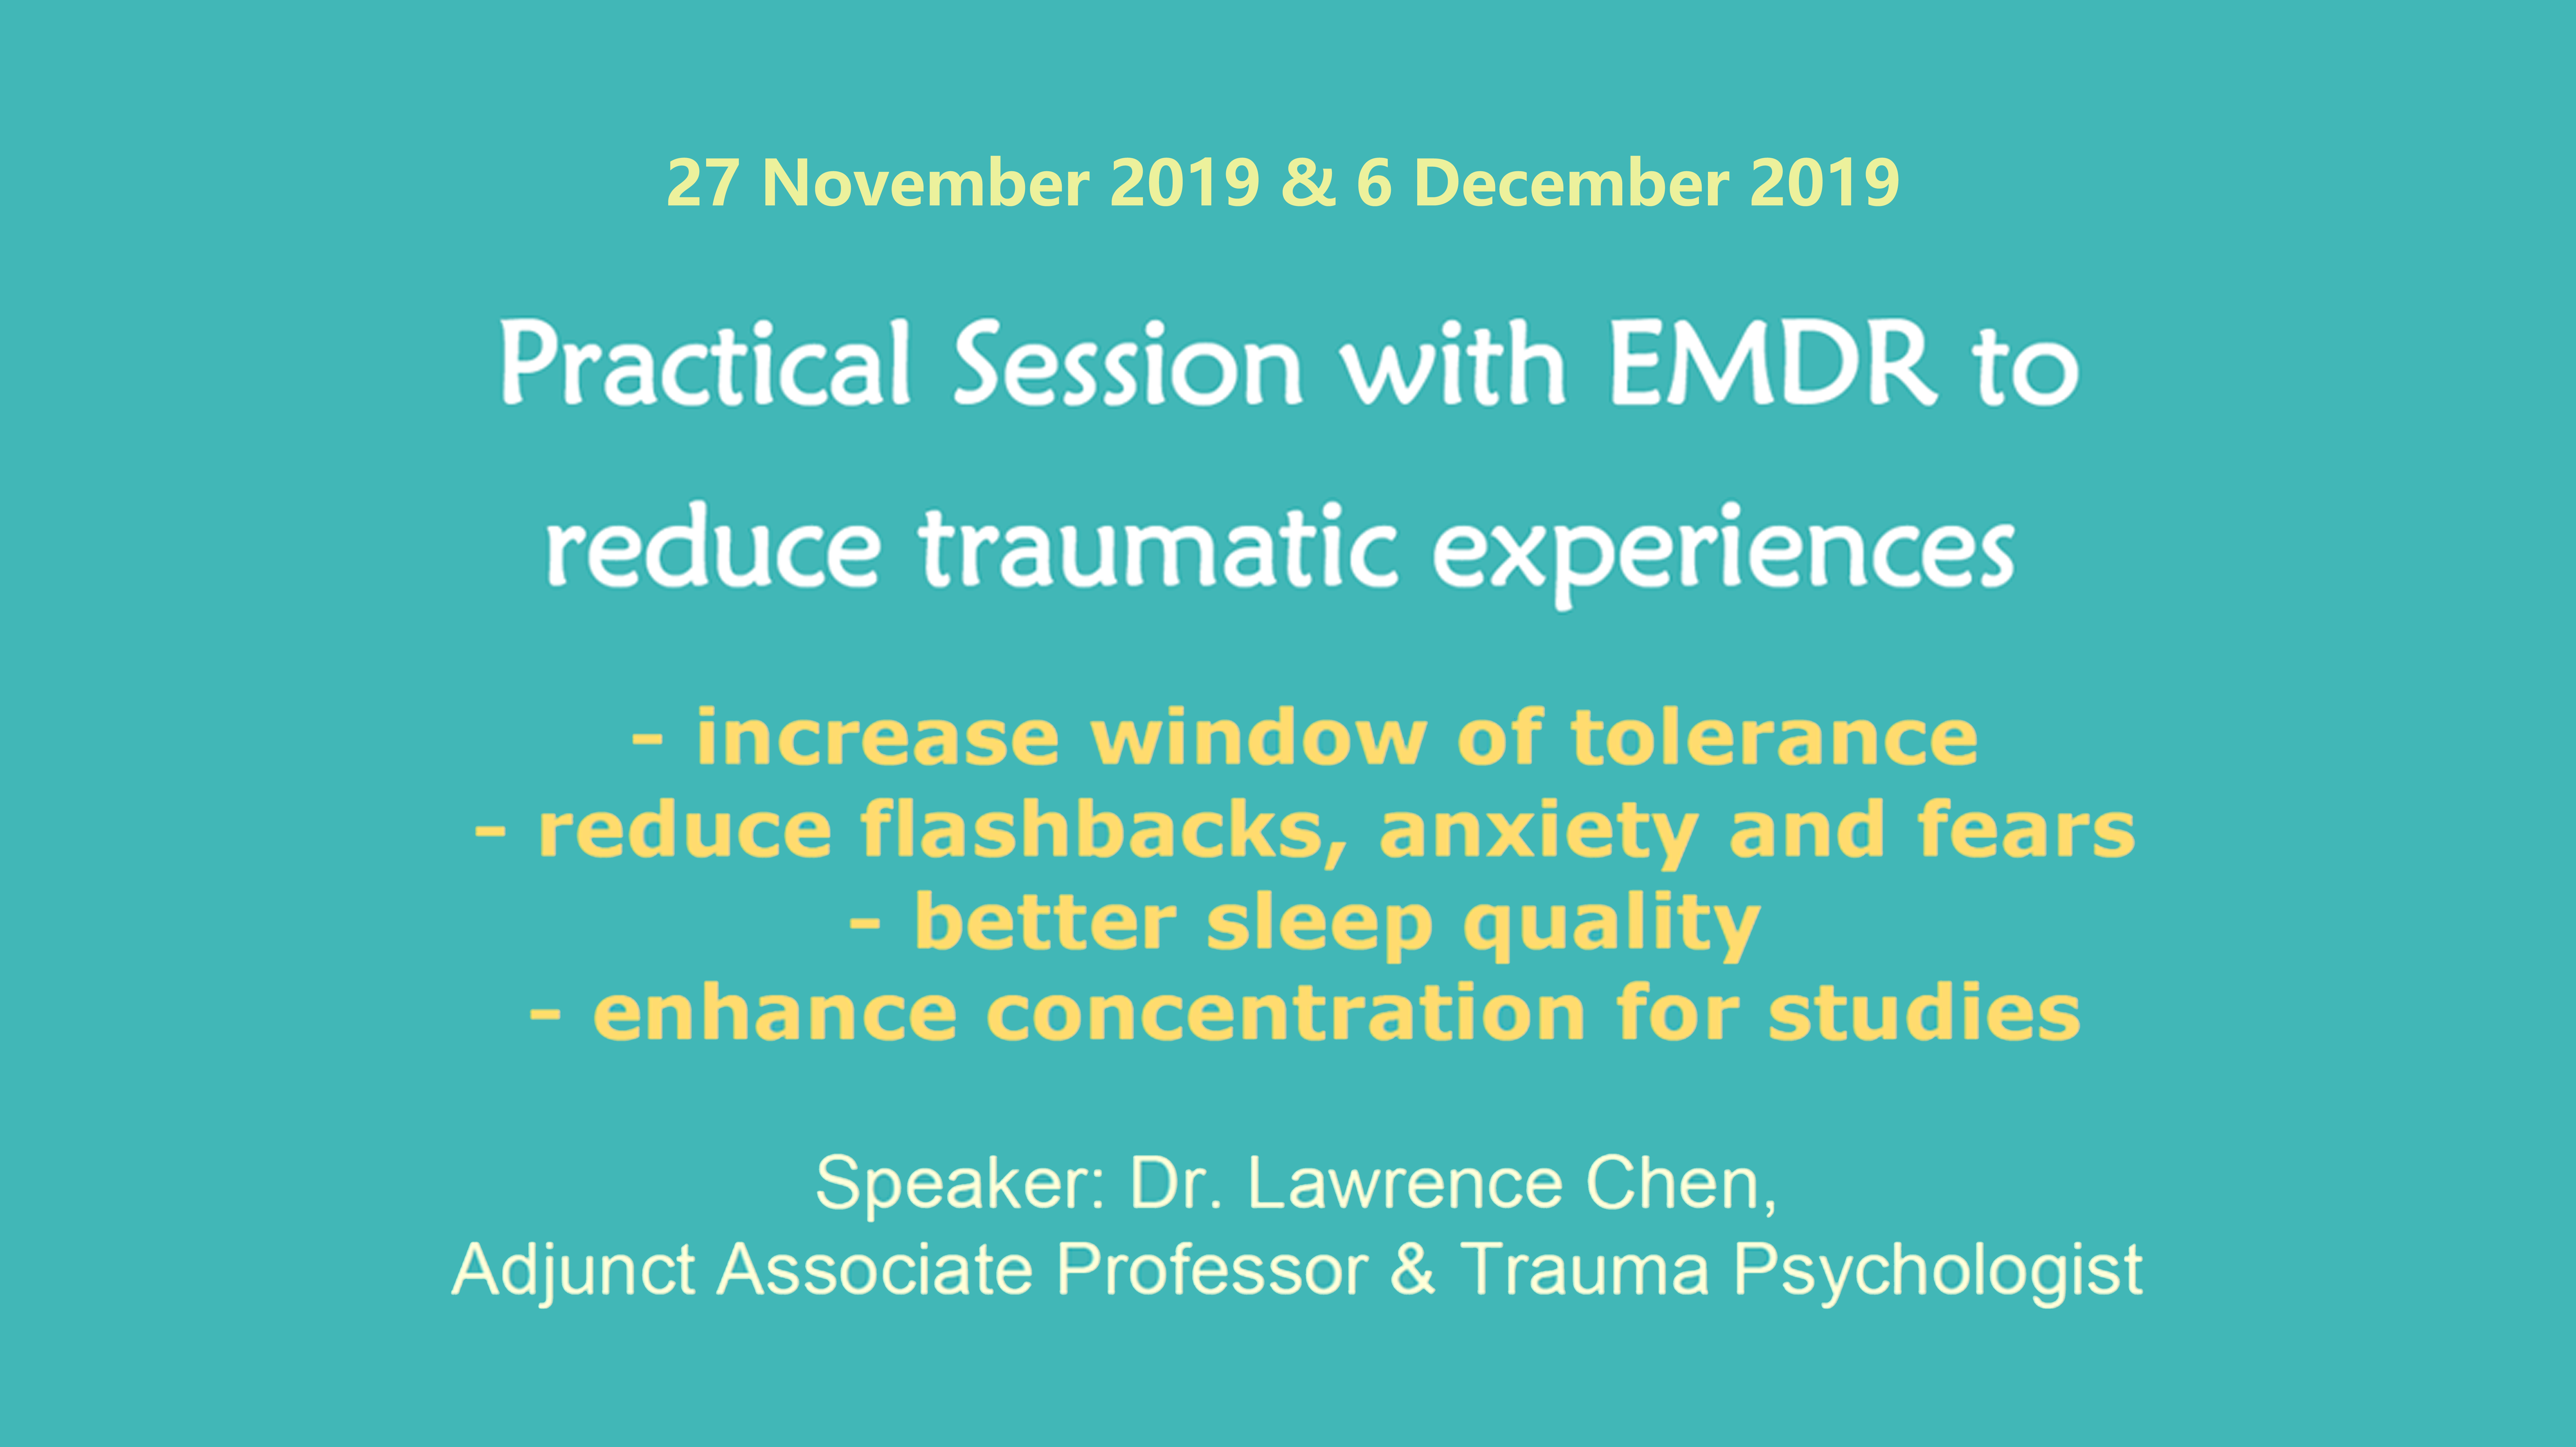 Practical Session with EMDR to reduce traumatic experiences